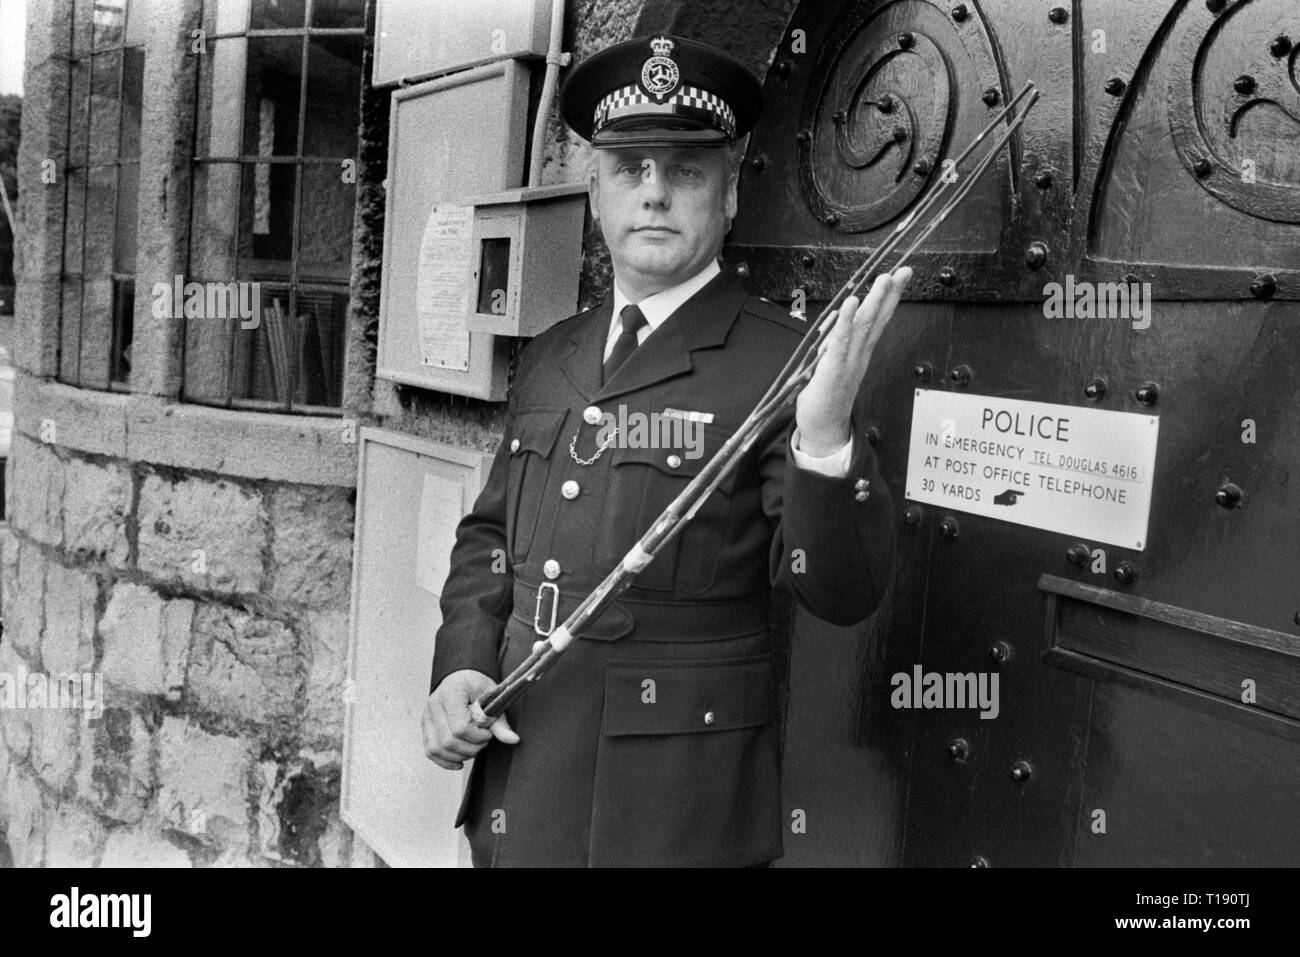 The birch rod, corporal punishment Law and Order the Isle of Man 1970s . Superintendent Alan Killip, the Isle of Man's highest ranking police officer holding a Manx birch rod at Castle Rushen, Castletown. The birching  was still used for corporal punishment on the Isle of Man during the 1970s. Administered by the police to petty offenders. 1978 HOMER SYKES Stock Photo